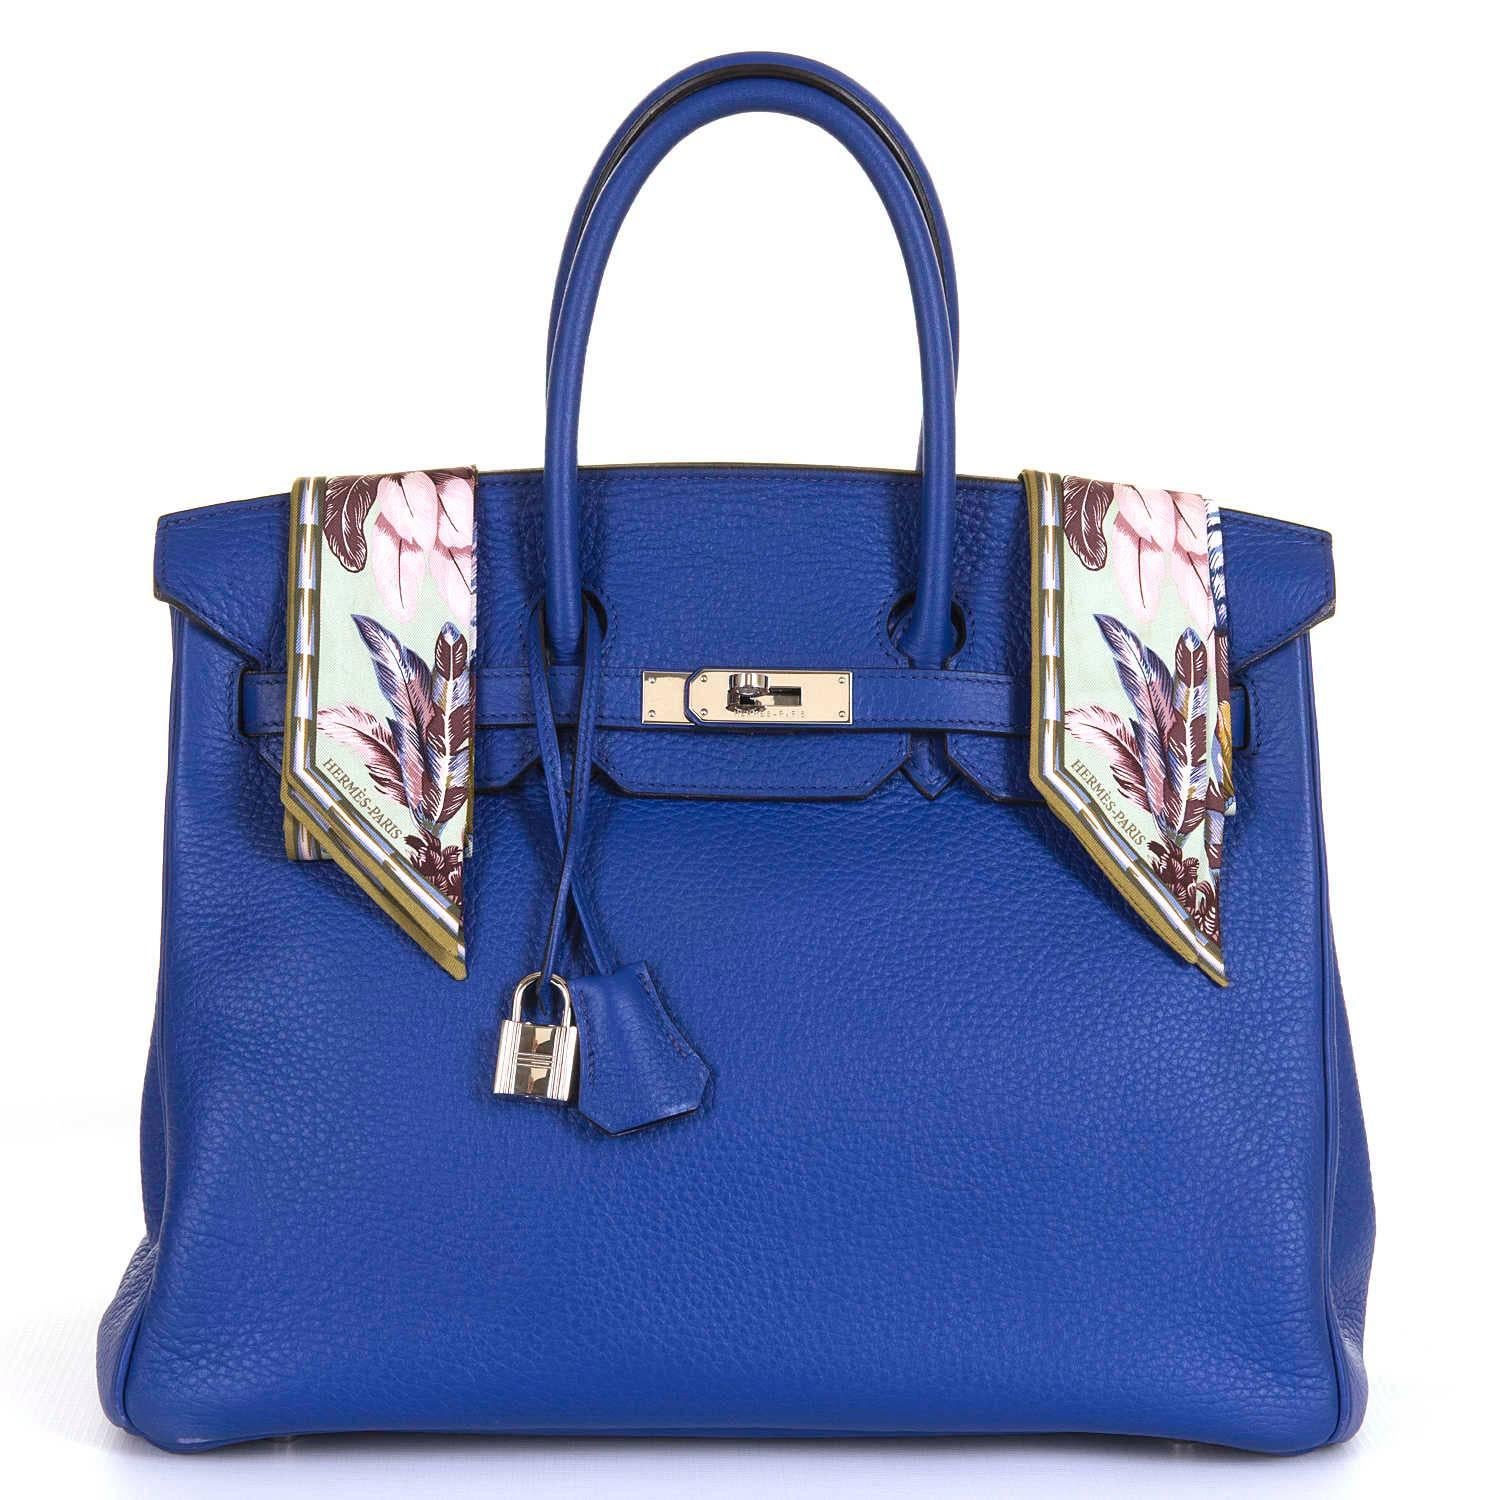 A Fabulous Hermes Birkin Bag in Pristine, 'Store-Fresh' condition throughout. Finished in Electric Blue Togo leather with Silver Palladium Hardware, absolutely the perfect combination. The bag has Chèvre leather to the interior in a matching